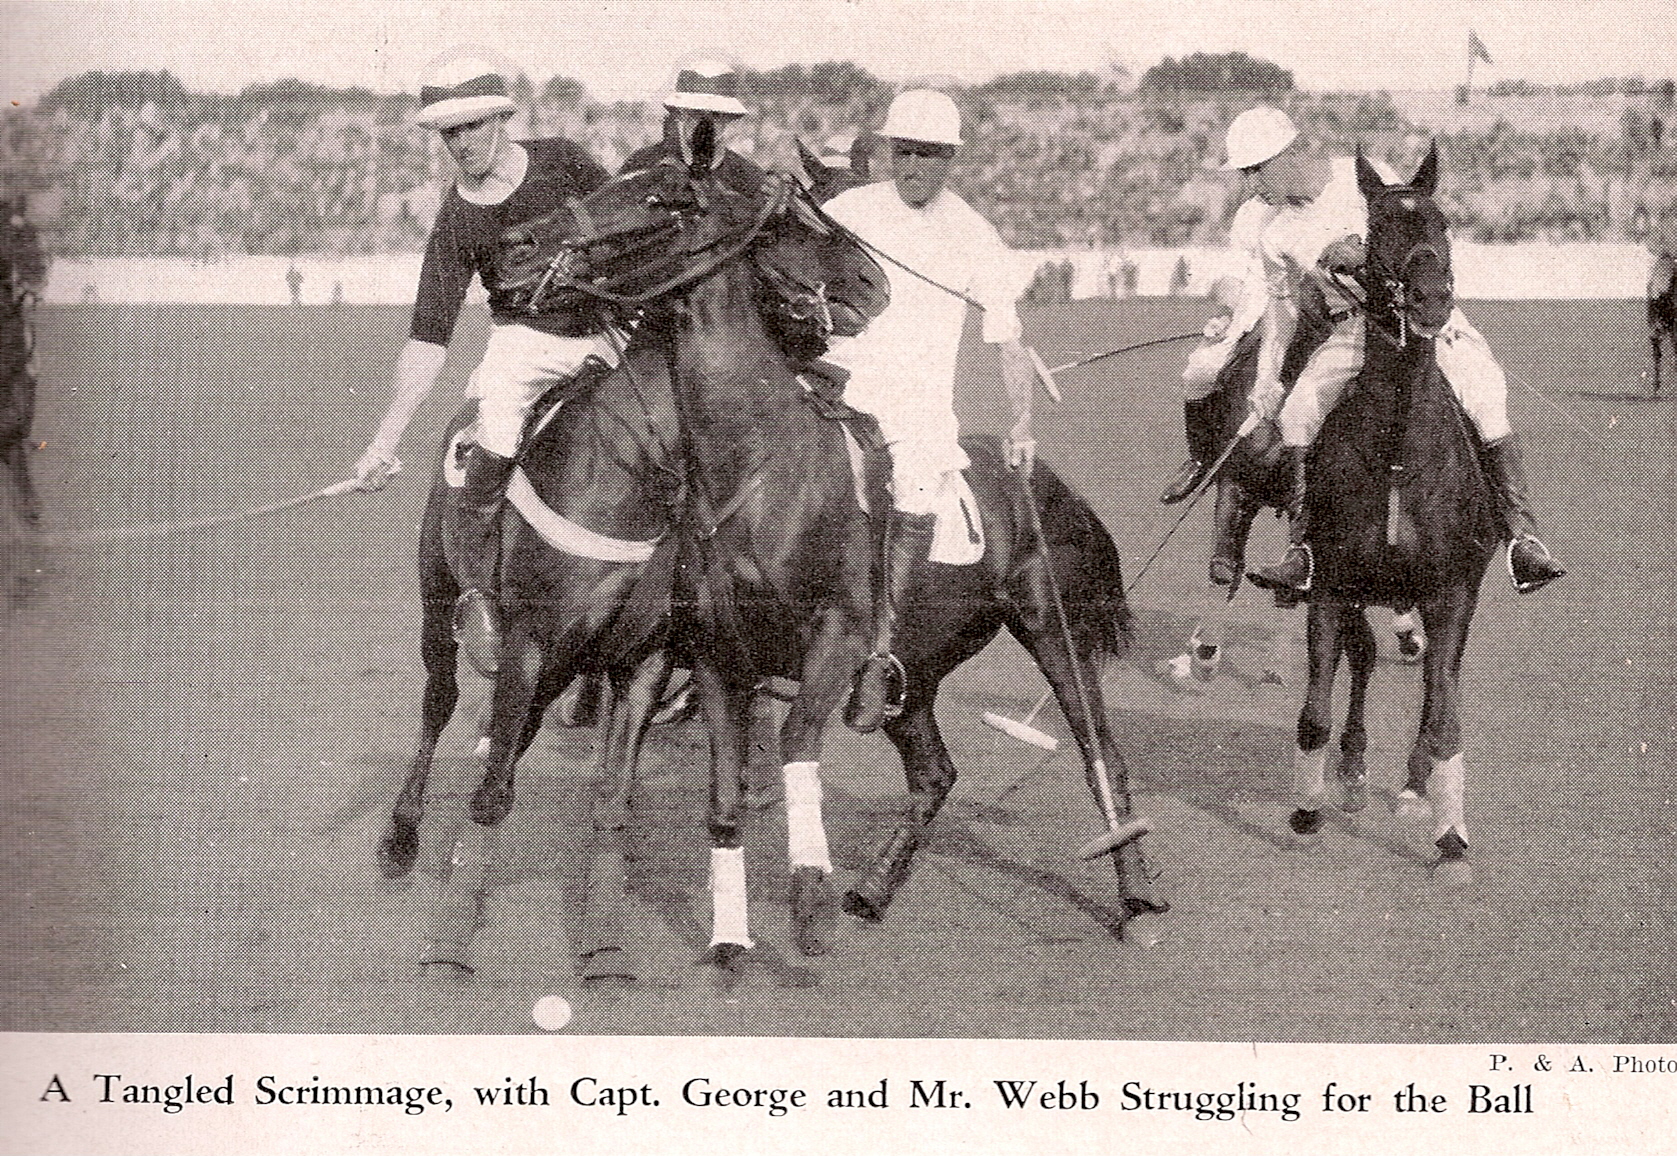 James Watson Webb in white on Chemawa in the 1927 International Polo Matches. Photo from POLO, Oct. 1927.